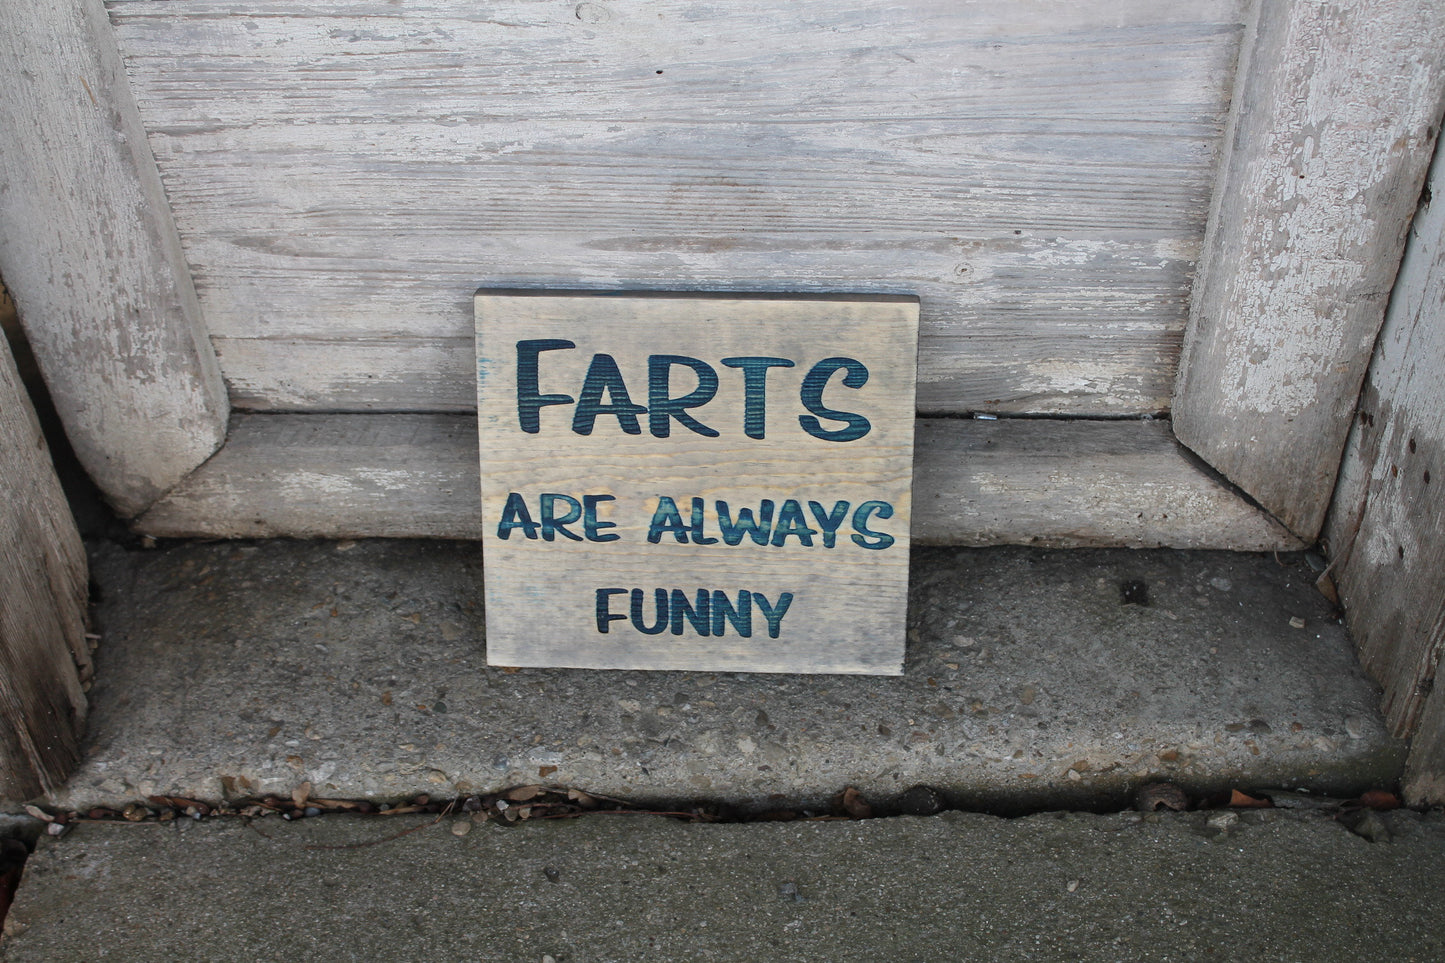 Funny, Bathroom, Sign, Farts are Always Funny, Humor, Engraved, Rustic, Wood, Gross, Joke, Silly, Guest Bath, Decor